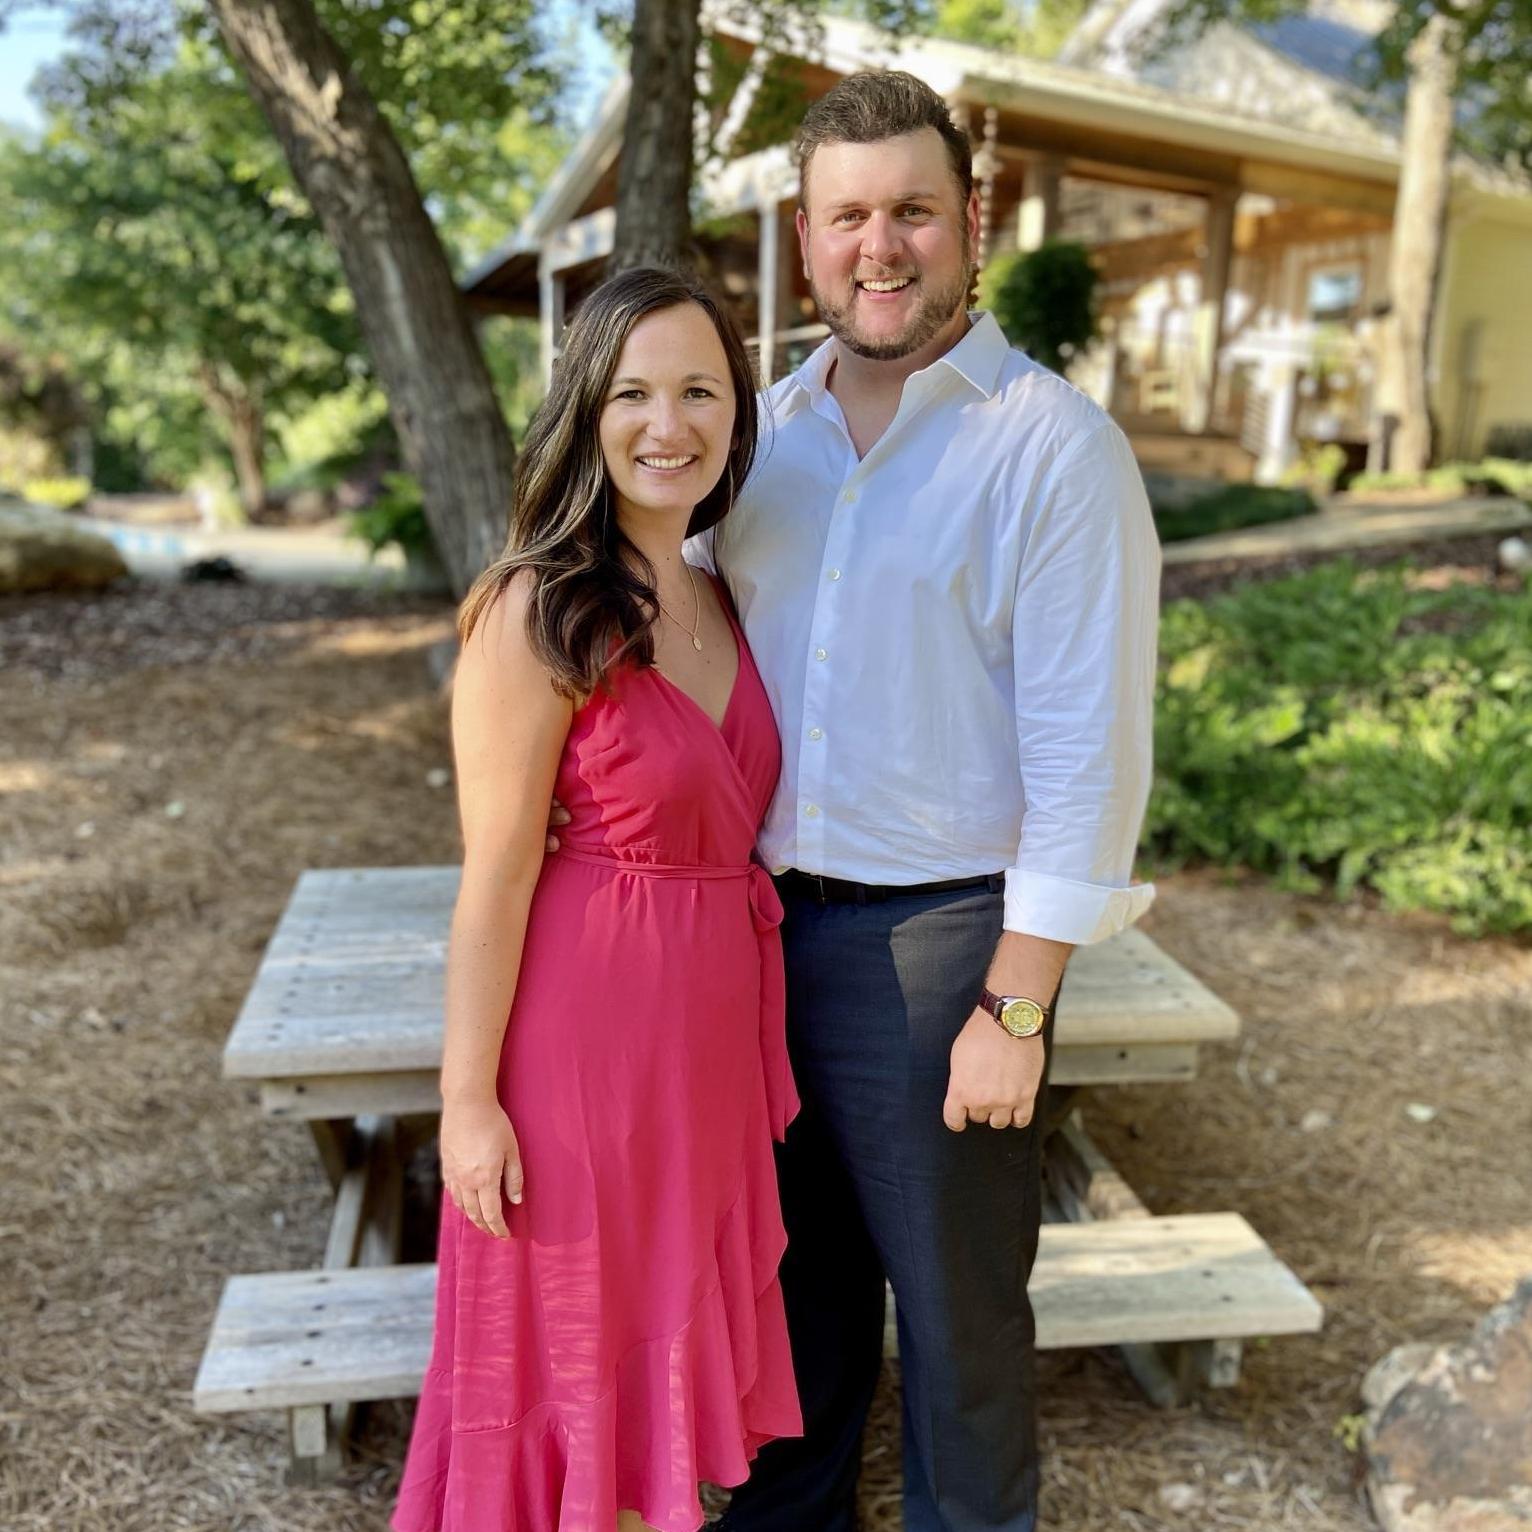 We went to Villa Rica to celebrate Alexis & Zach's wedding in July 2020. We loved being able to celebrate them after their wedding was postponed in April 2020.